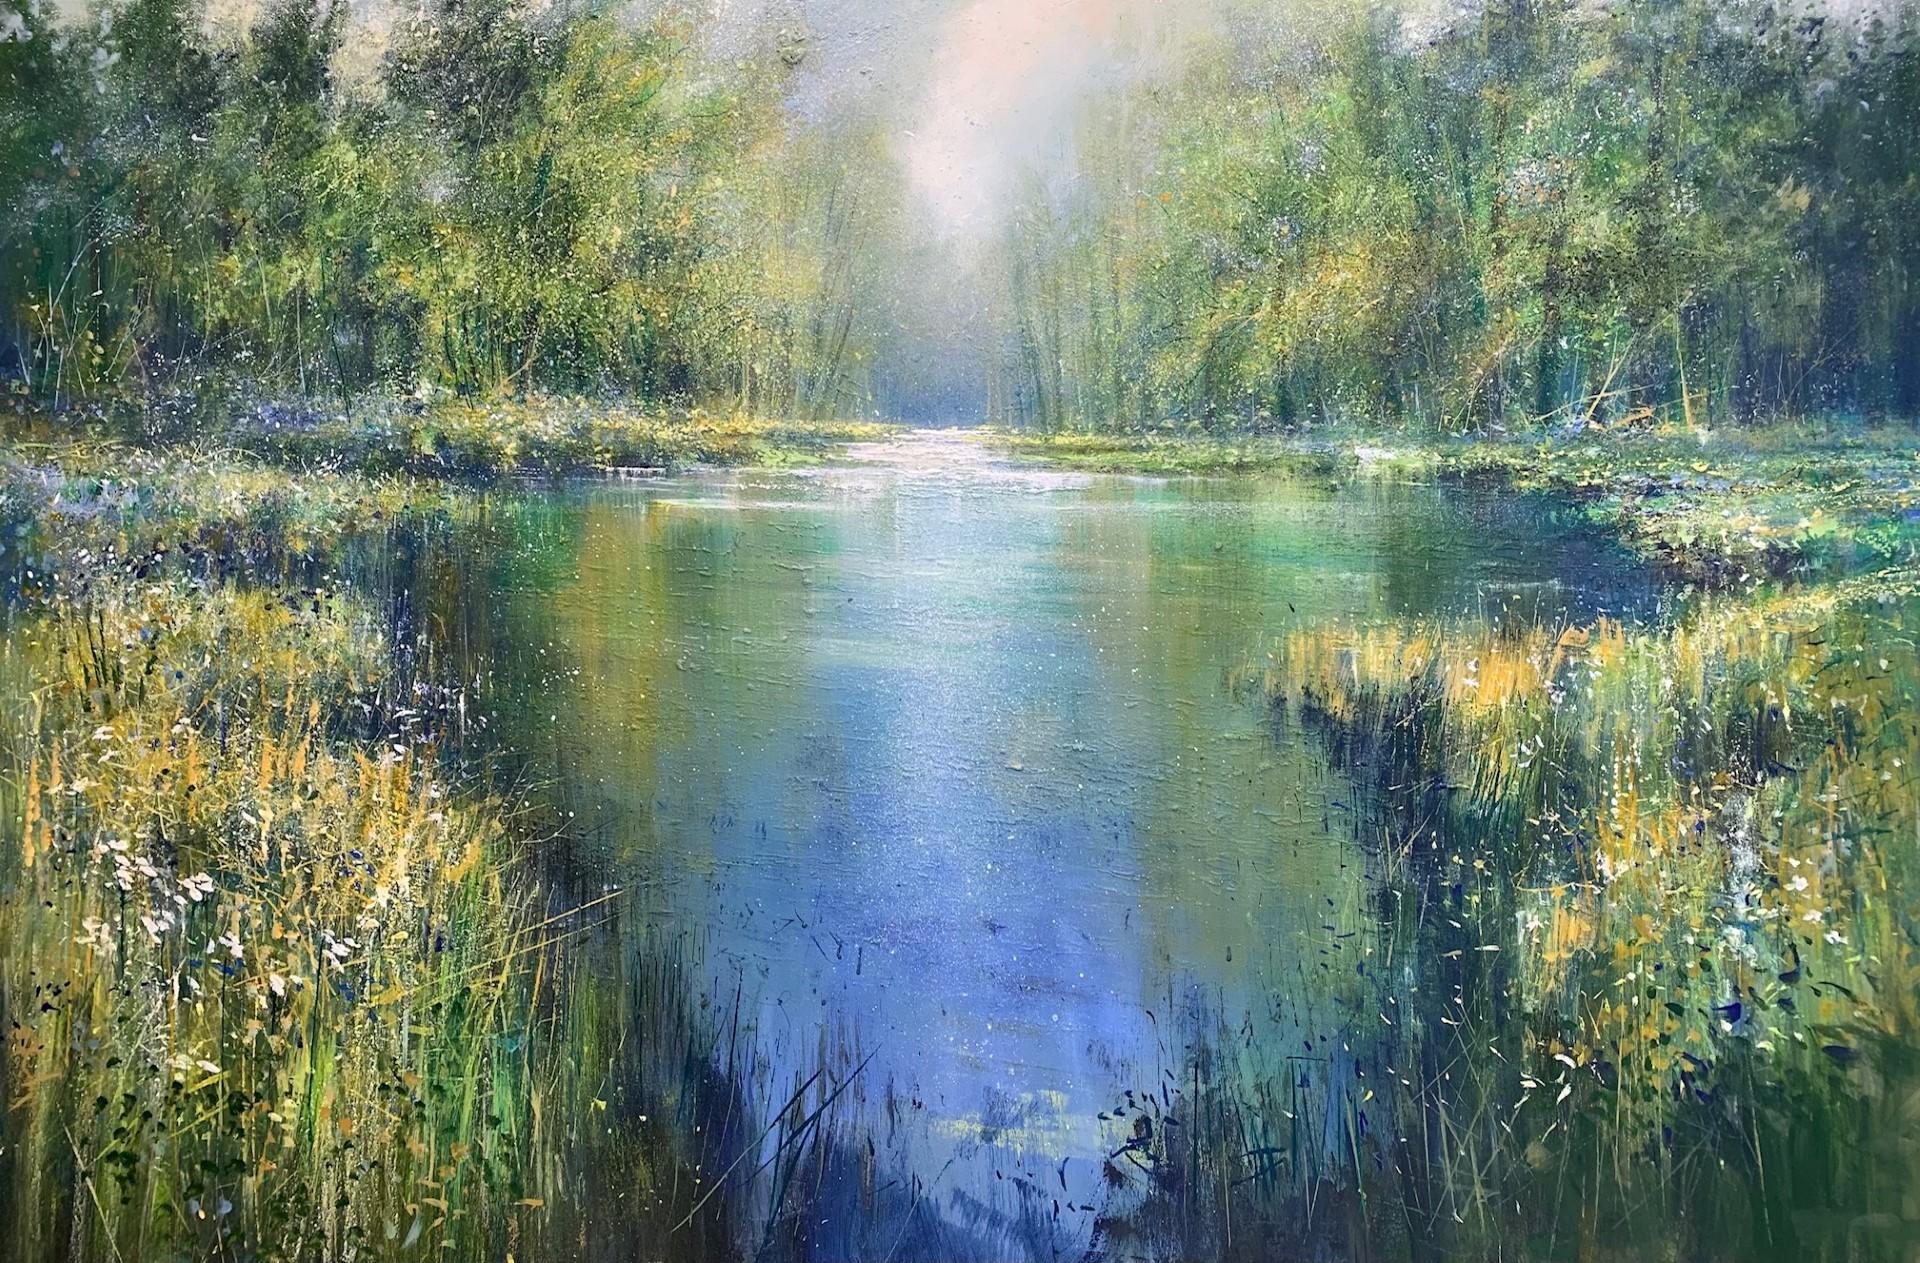 Clearing Mist on the River-original impressionism seascape painting-art for sale - Painting by Jonathan Trim